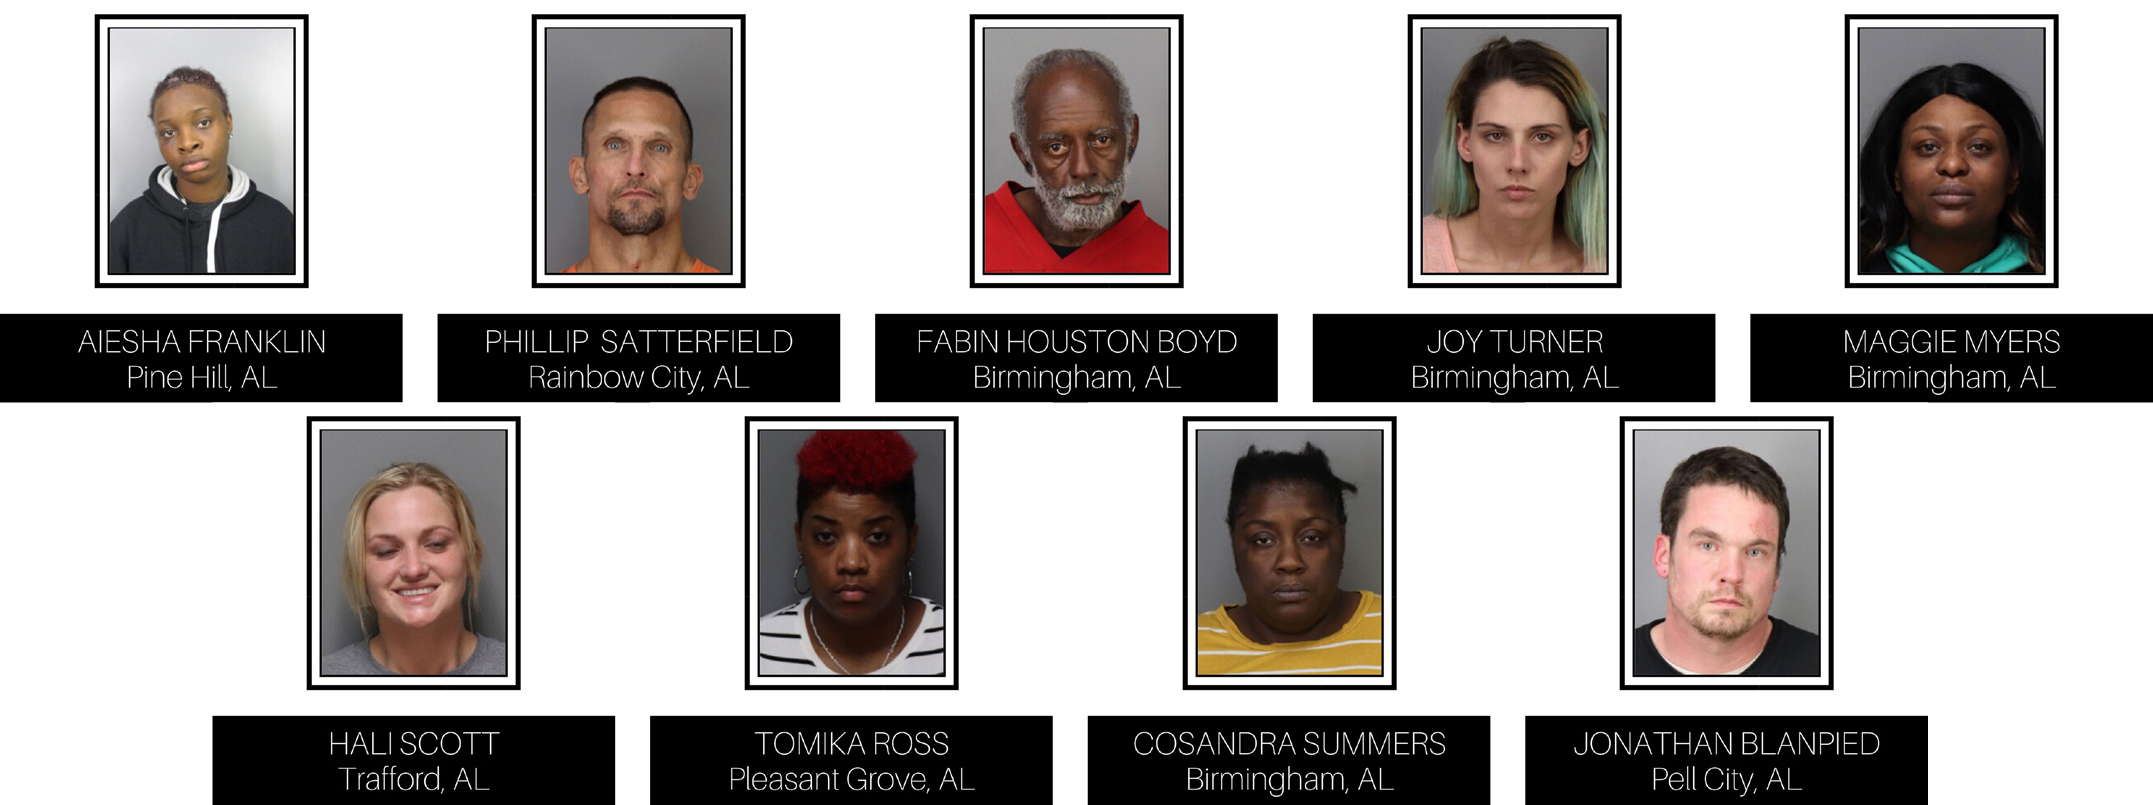 Trussville Police Department: 9 charged with shoplifting in Trussville